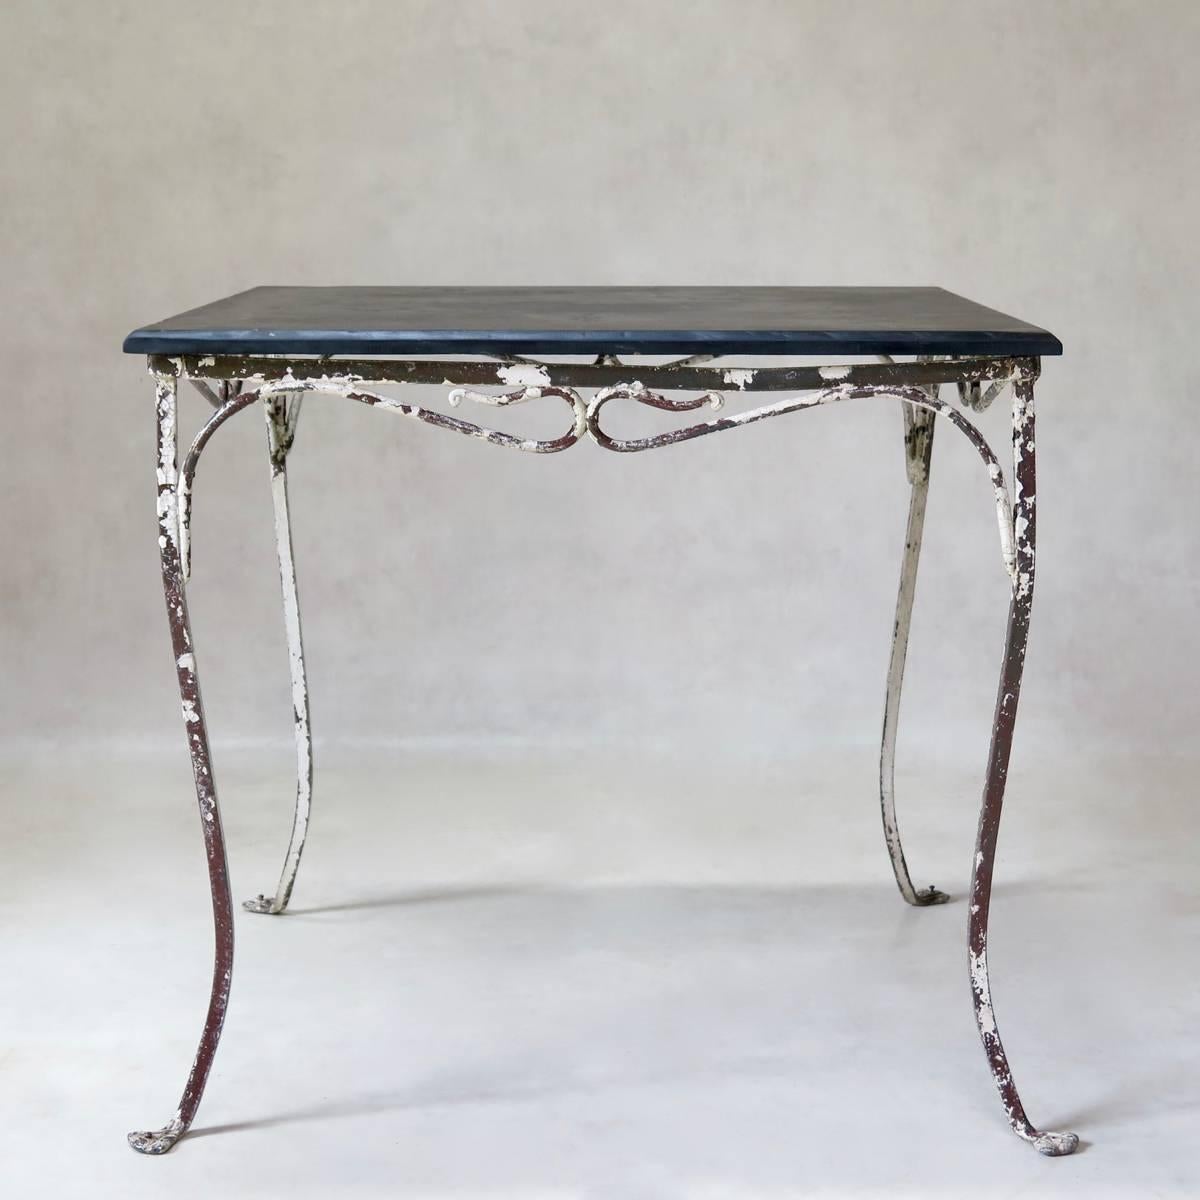 Very pretty square garden table with a painted iron structure and a slate top with belveled edges. Raised on cabriole legs with paw feet. Two items available -- one has a white finish and the other white with earlier brown showing through.